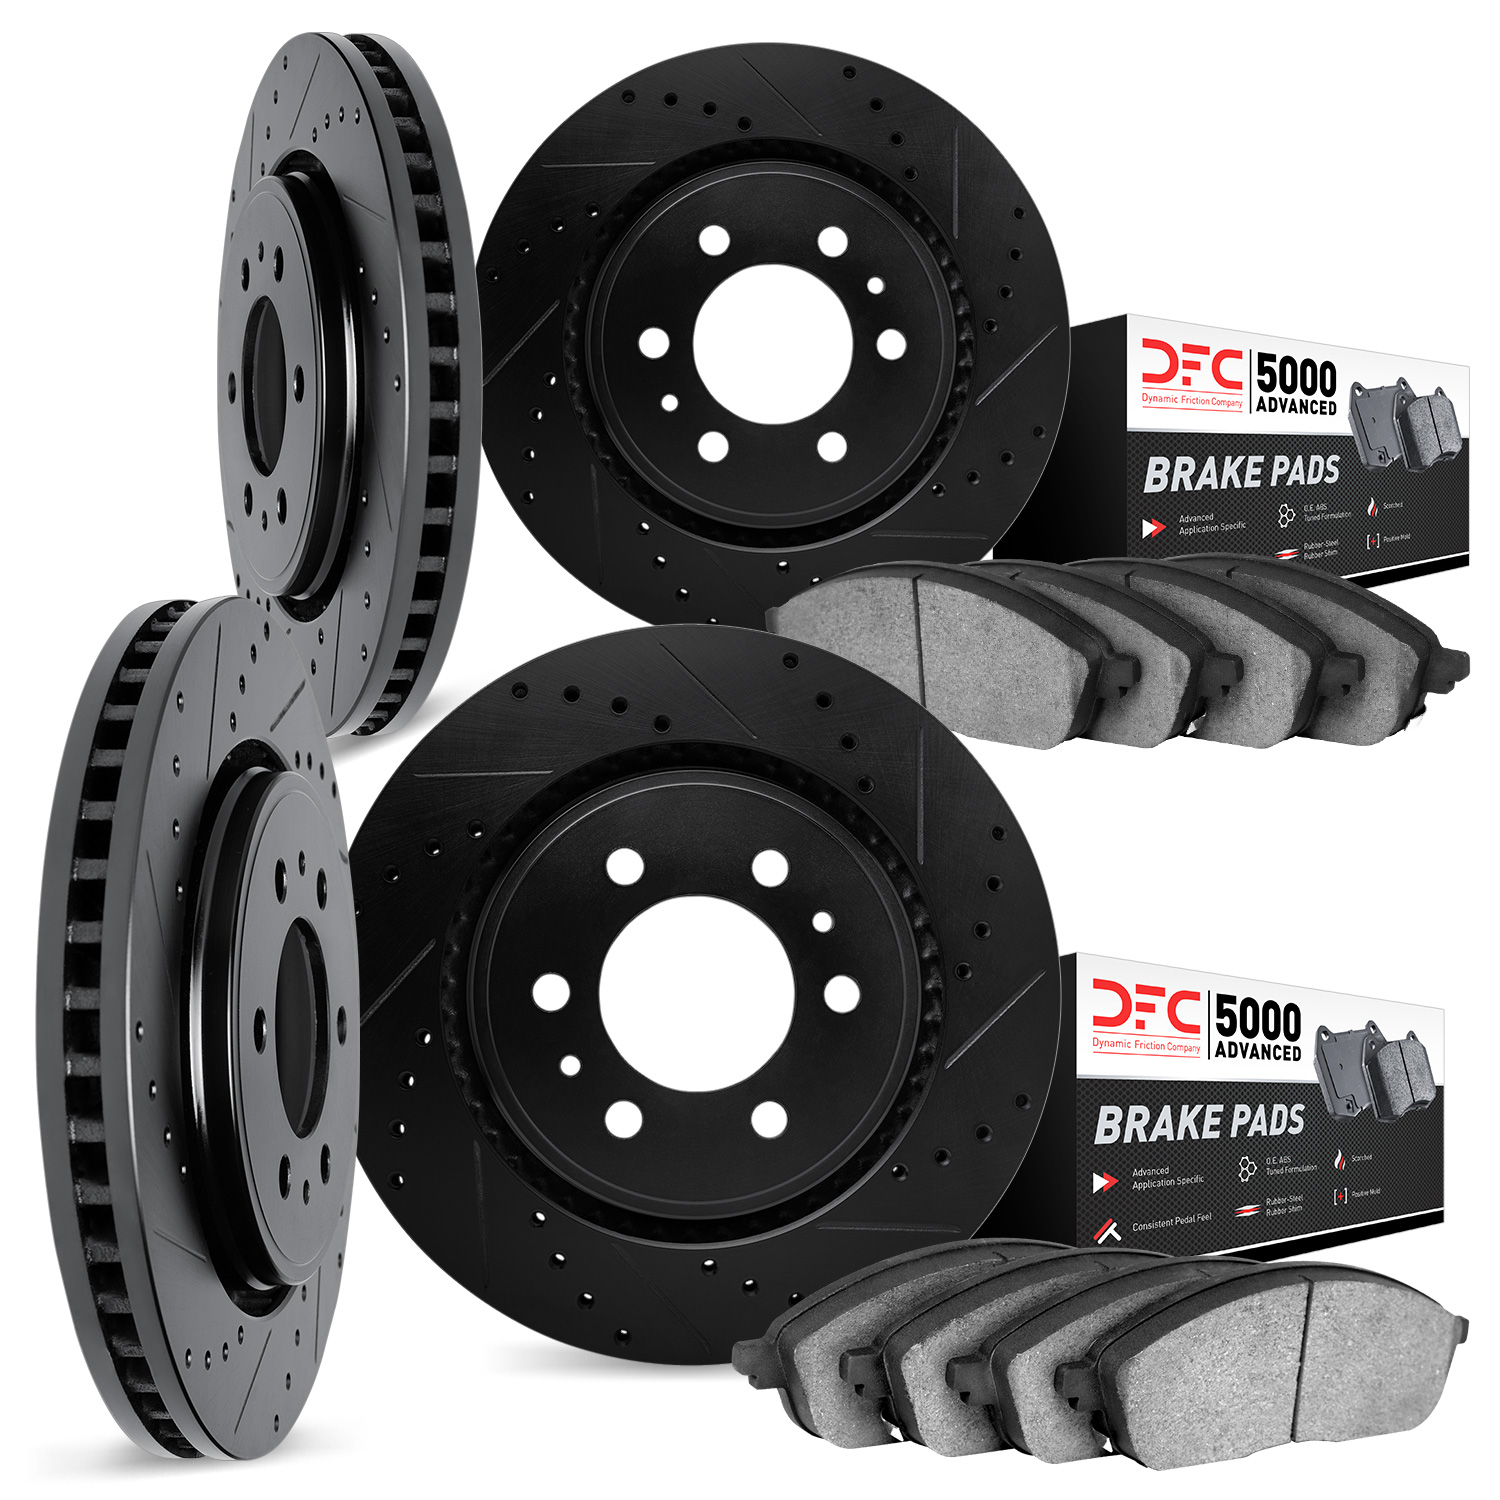 8504-48030 Drilled/Slotted Brake Rotors w/5000 Advanced Brake Pads Kit [Black], 2009-2014 GM, Position: Front and Rear